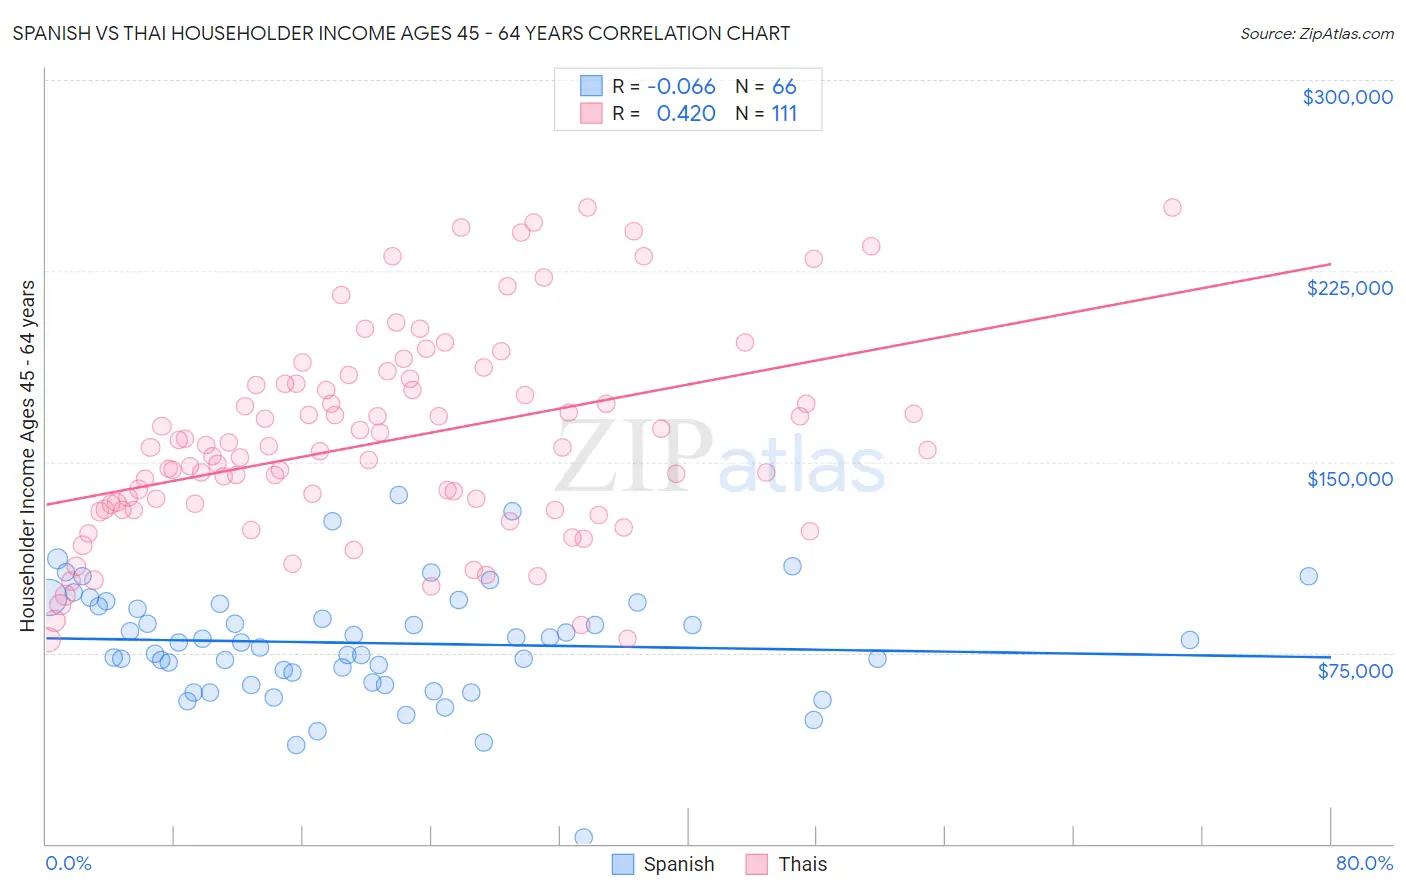 Spanish vs Thai Householder Income Ages 45 - 64 years